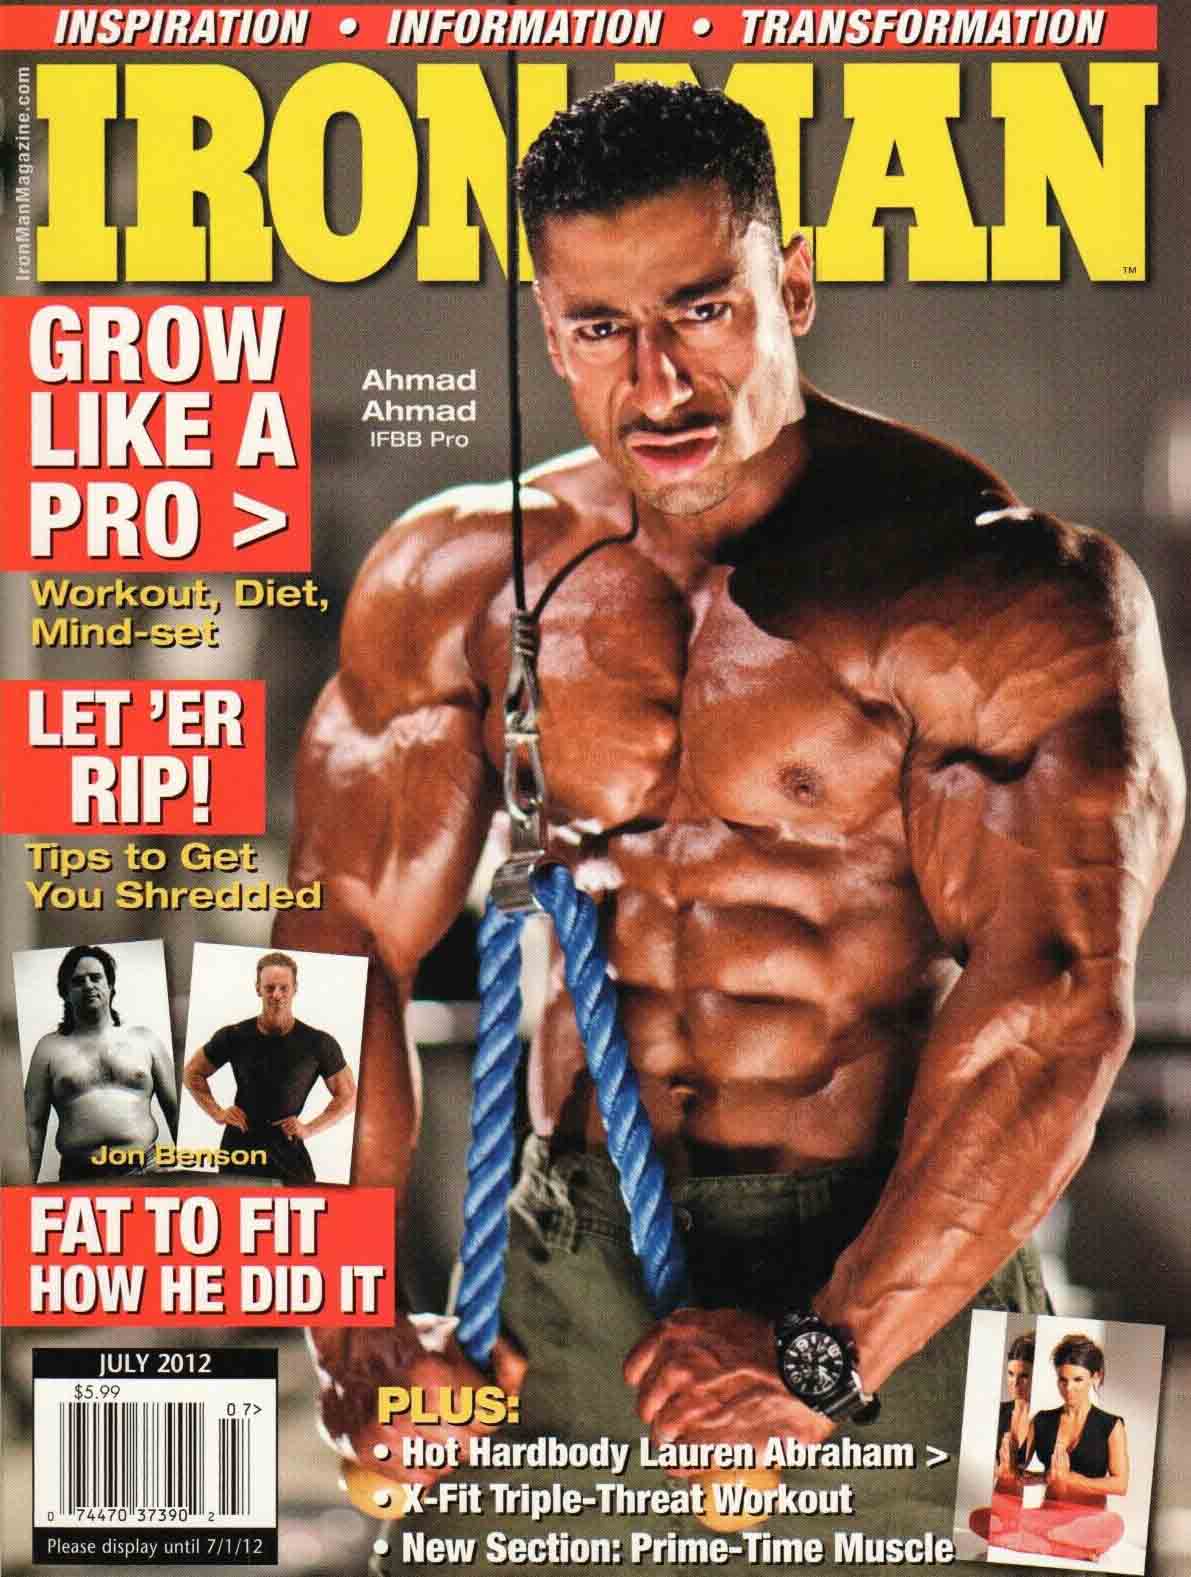 Ironman July 2012 magazine back issue Ironman magizine back copy Ironman July 2012 American magazine Back Issue about bodybuilding, weightlifting, and powerlifting. Published by Iron Man Publishing. Inspiration, Information, Transformation.